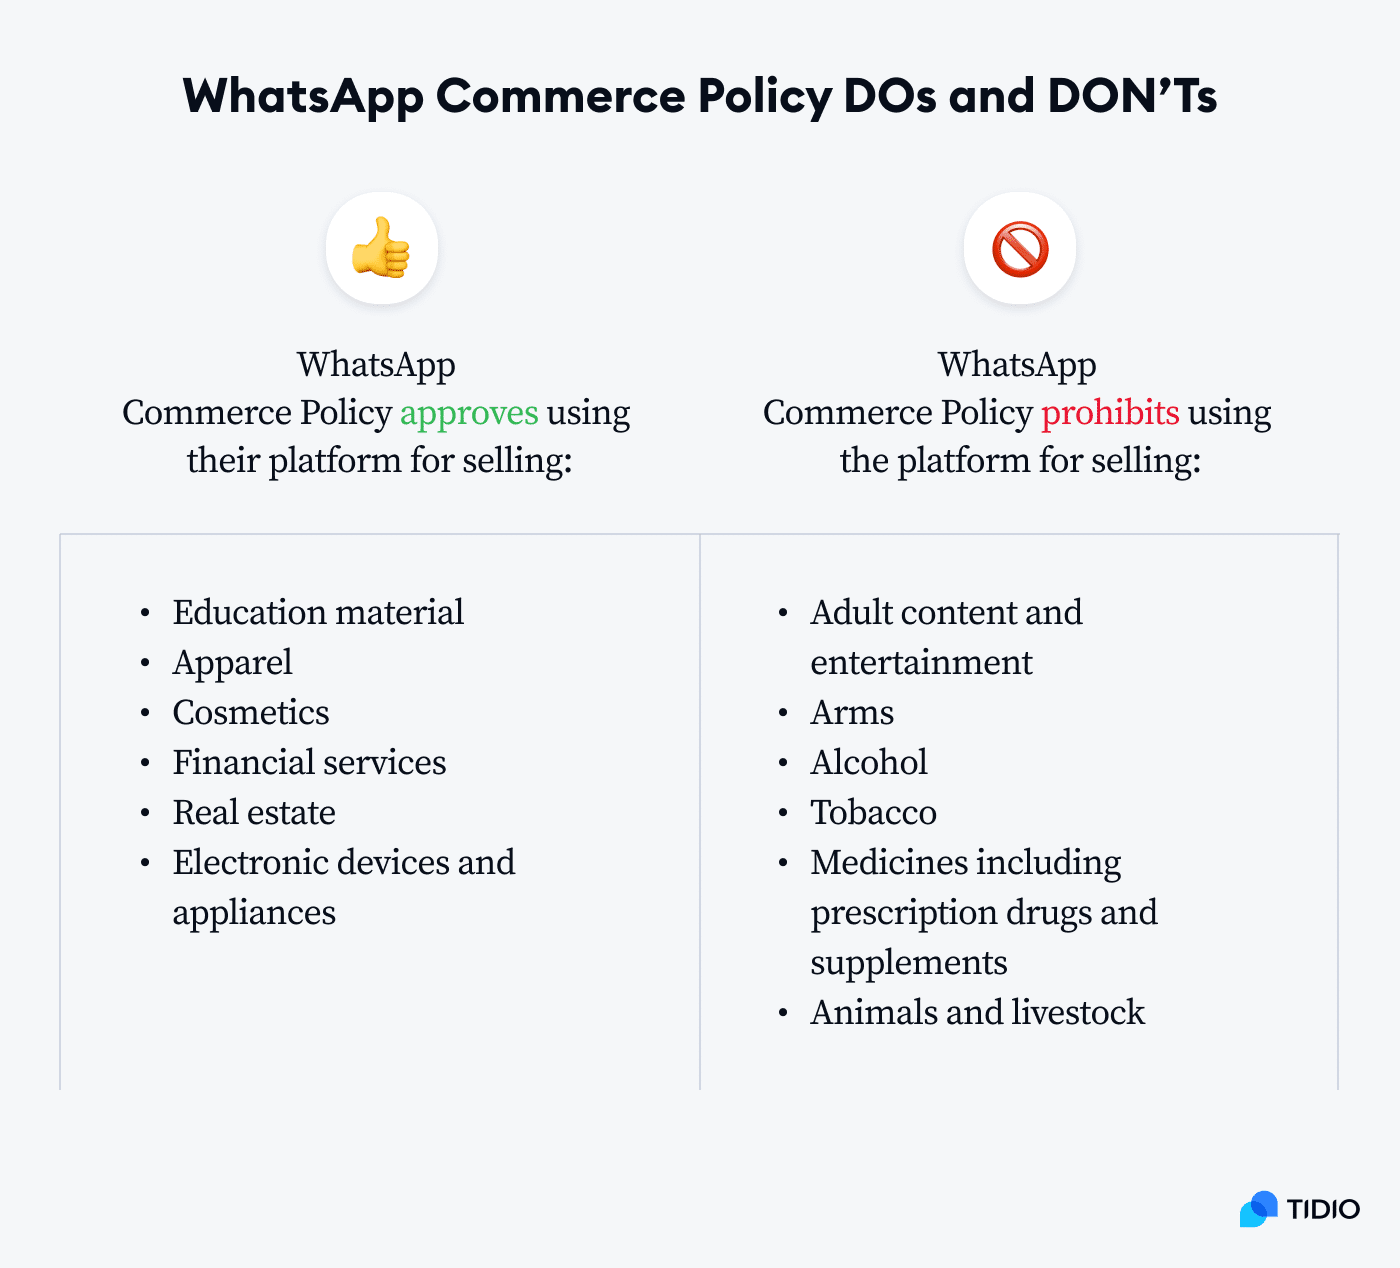 whatsapp commerce policy dos and donts on image